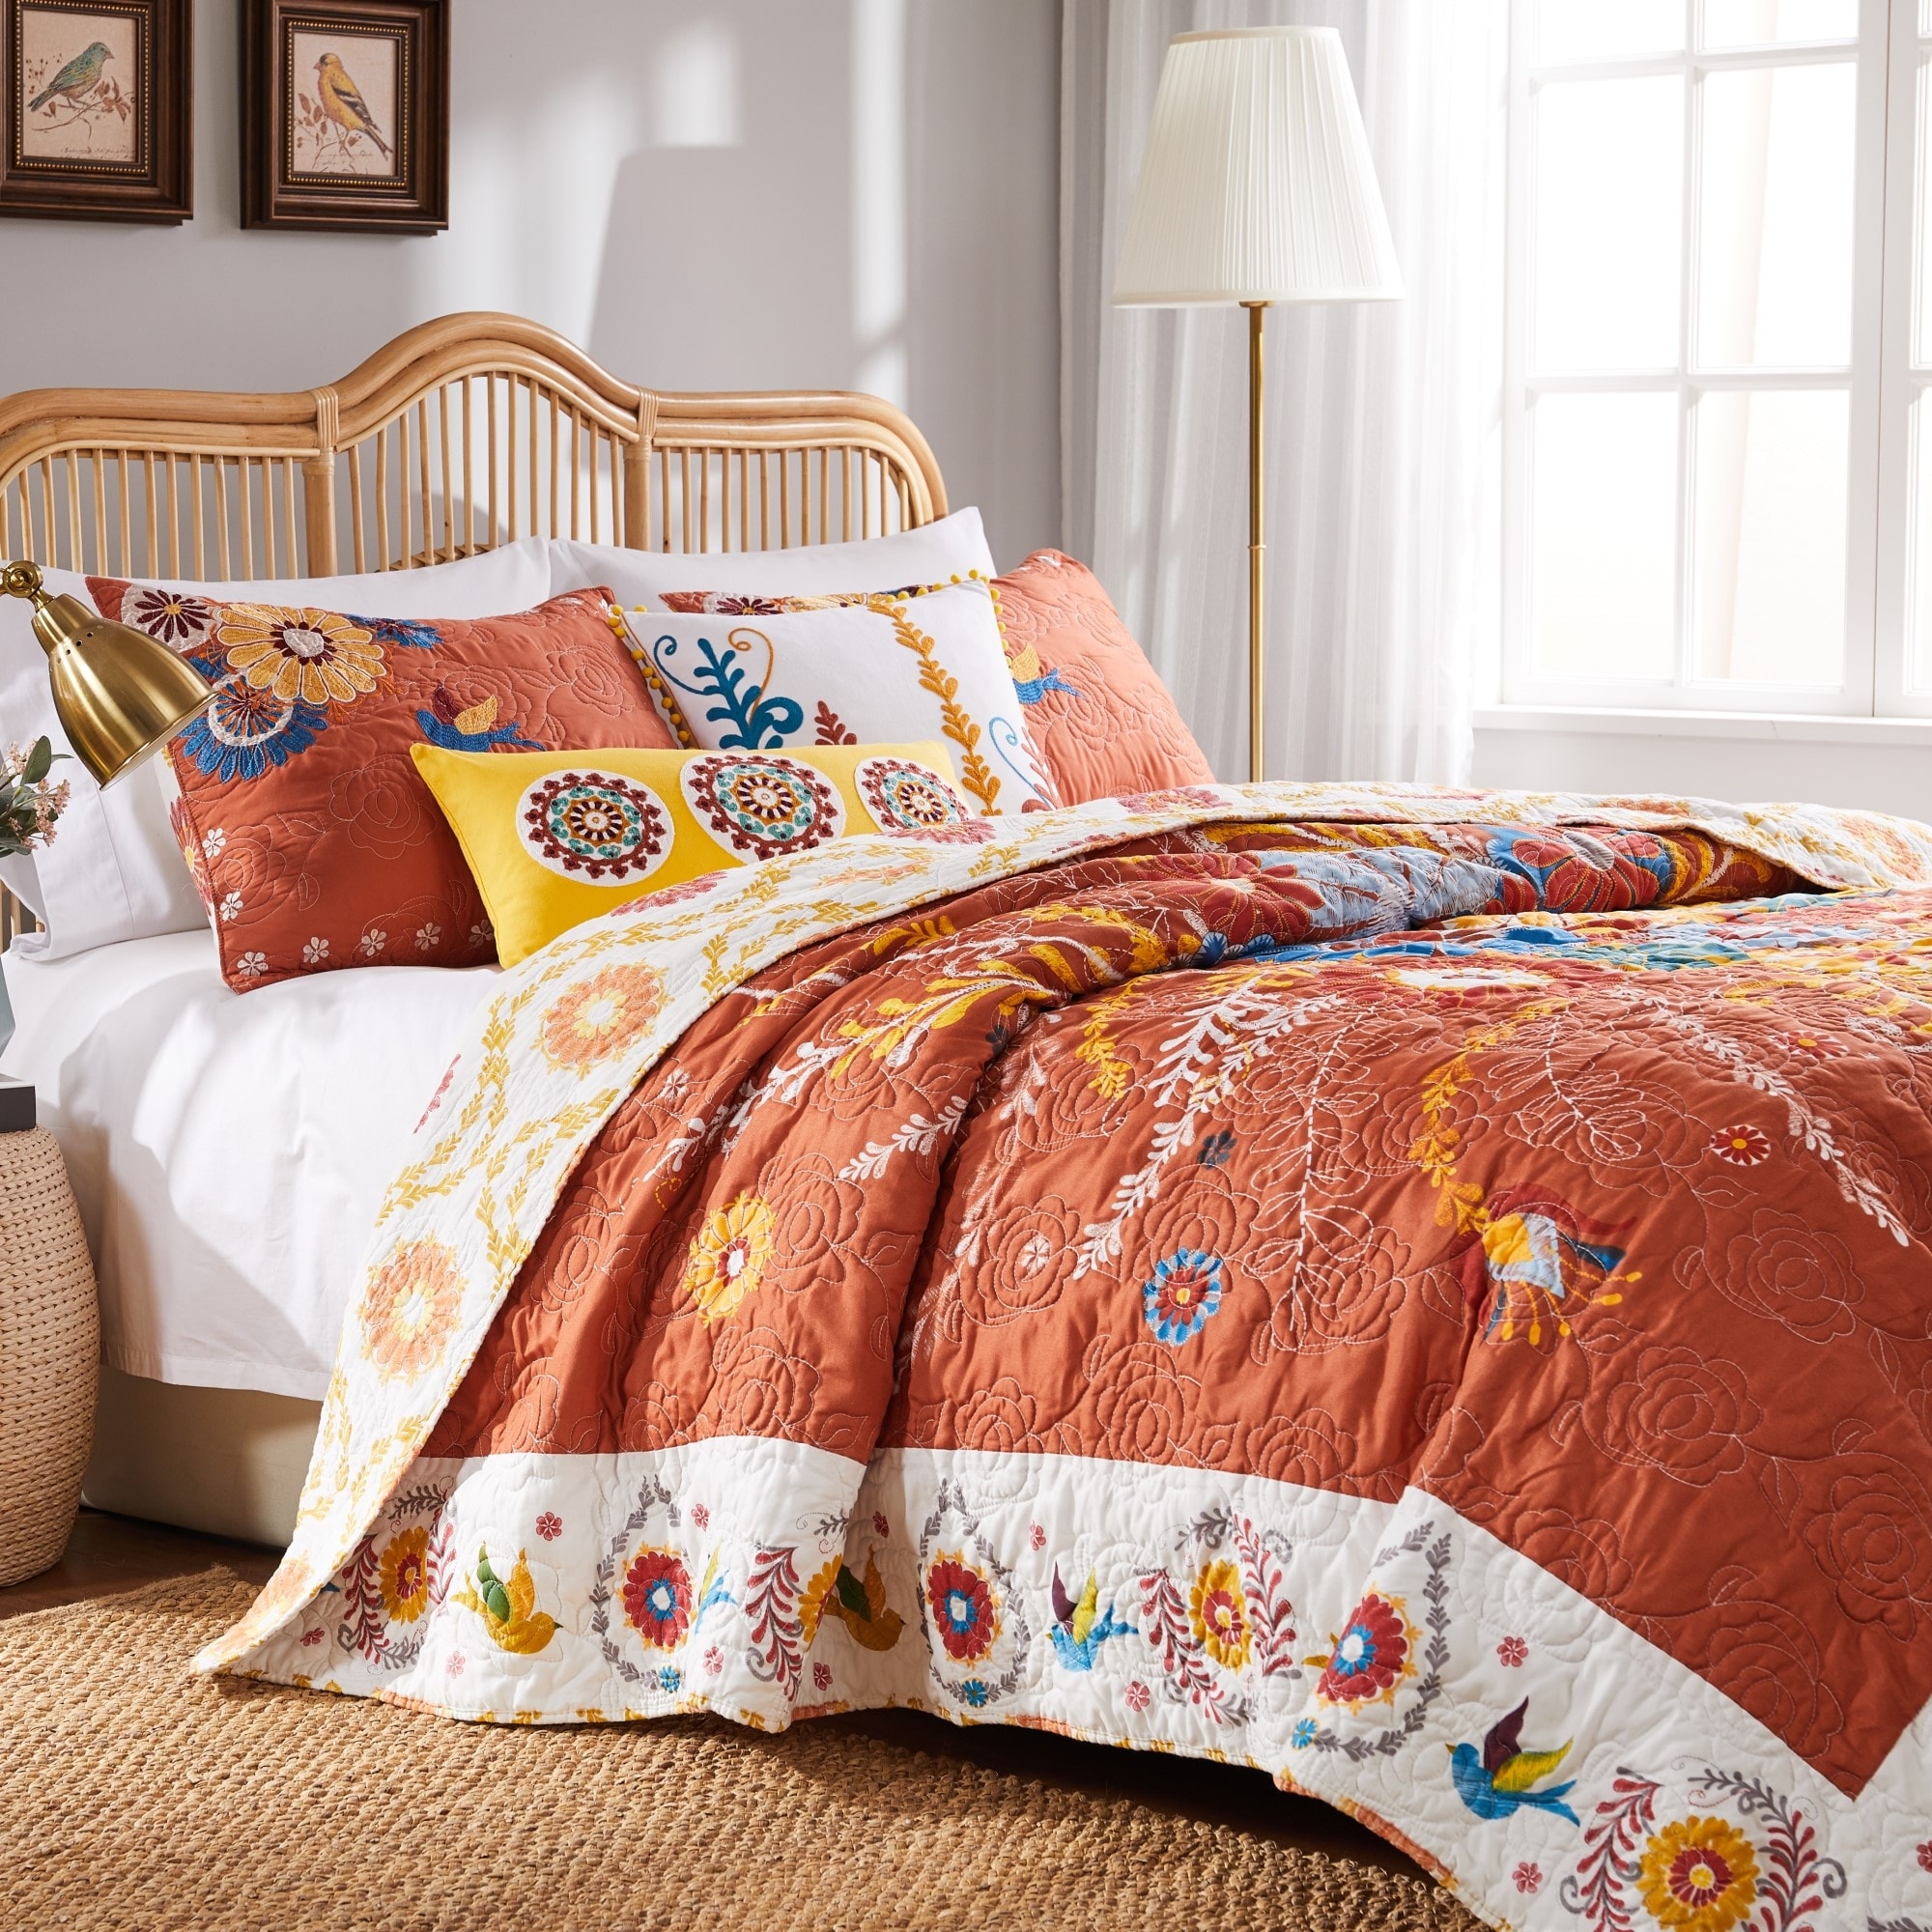 Bohemian & Eclectic, Floral Bedding - Bed Bath & Beyond